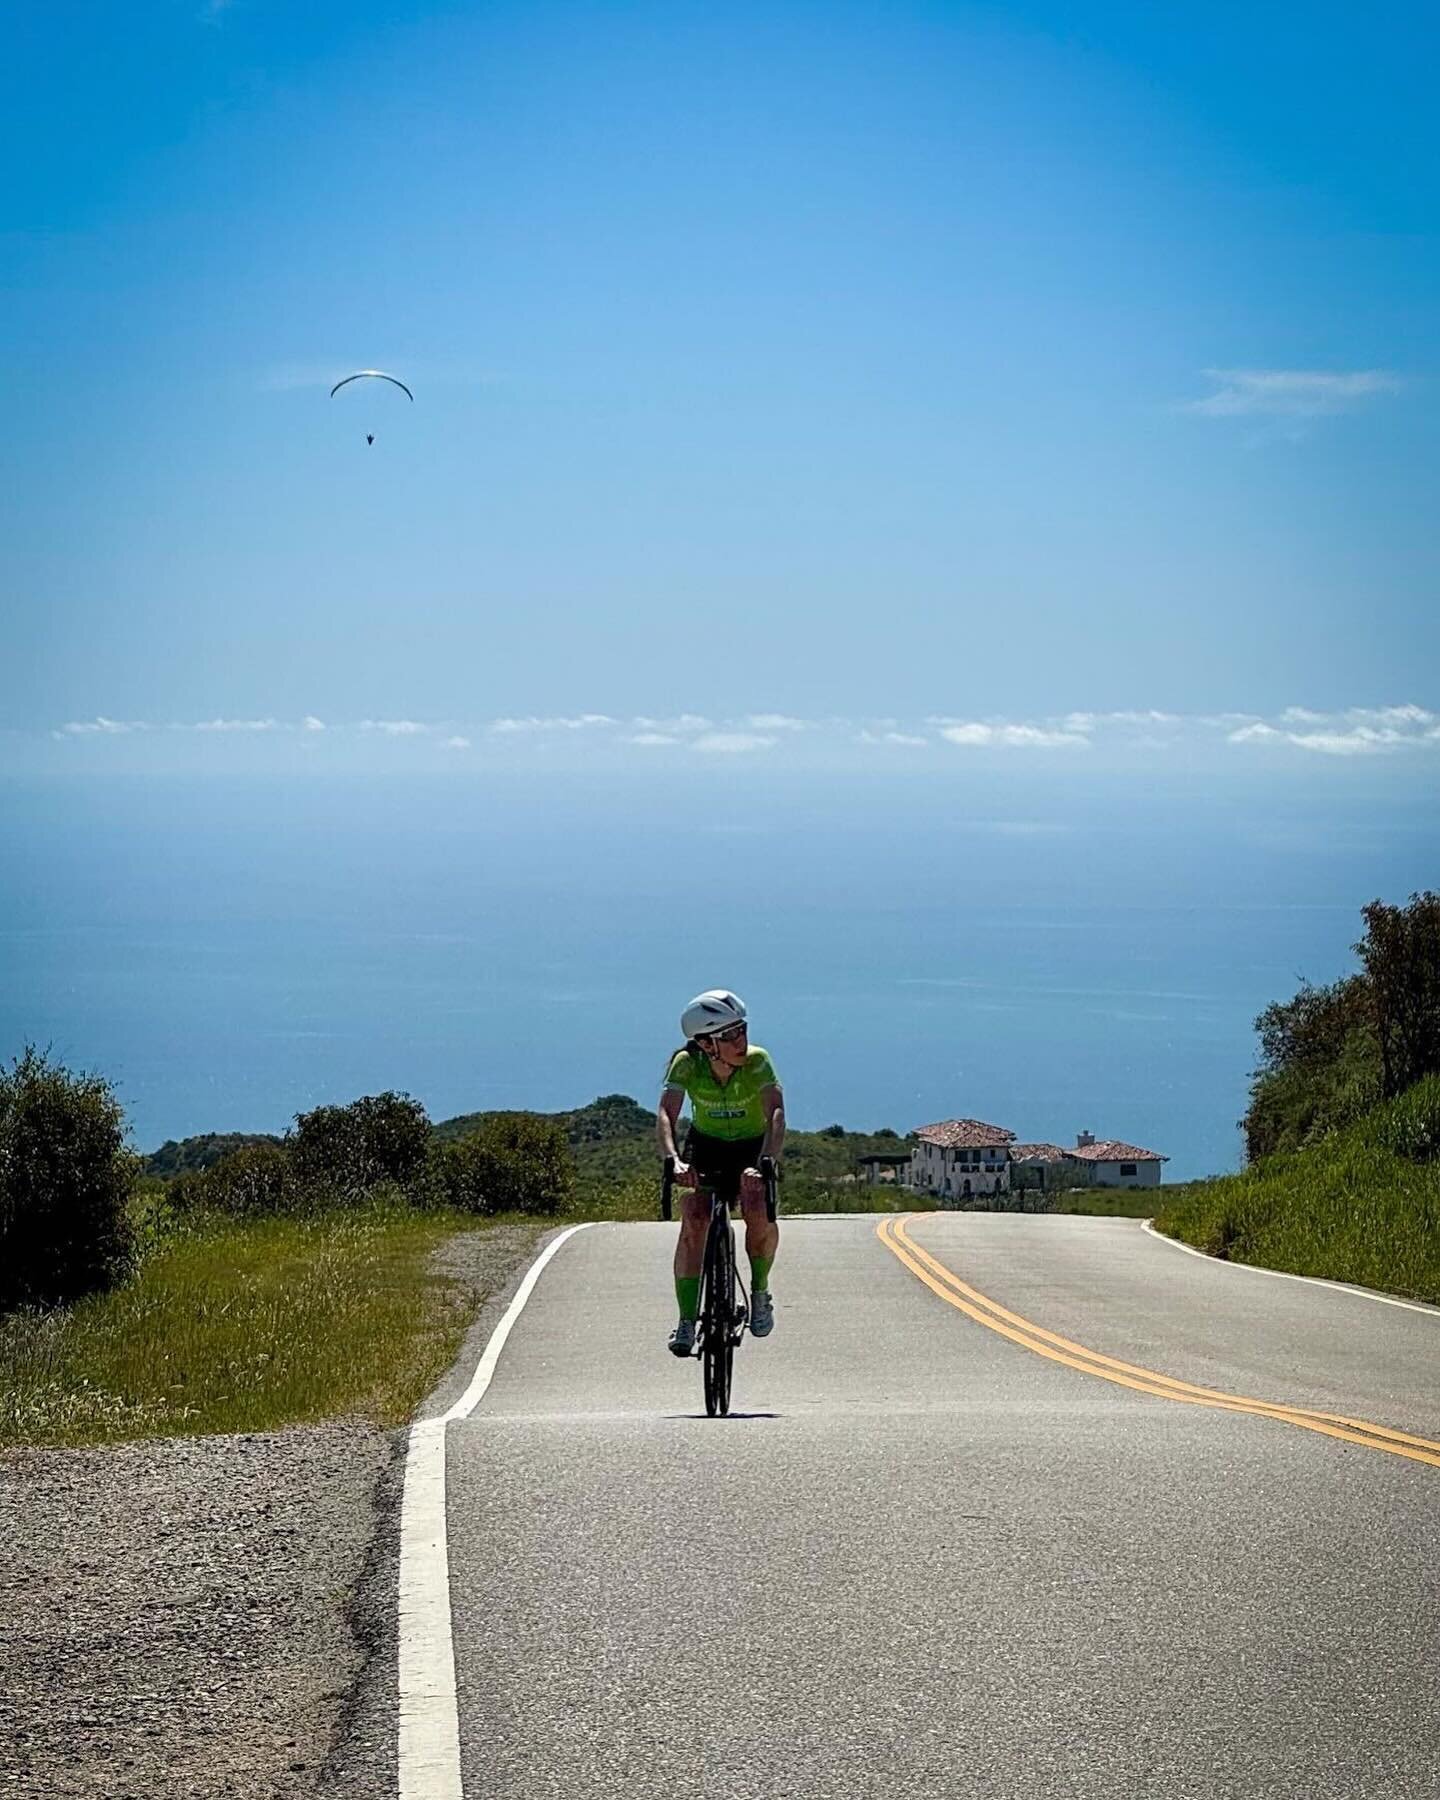 Rolling up on the season like&hellip;🚴🏻☀️

After a week of incredible riding in Southern California we&rsquo;re feeling eager for some racing on the horizon!

📸: @gerryantics